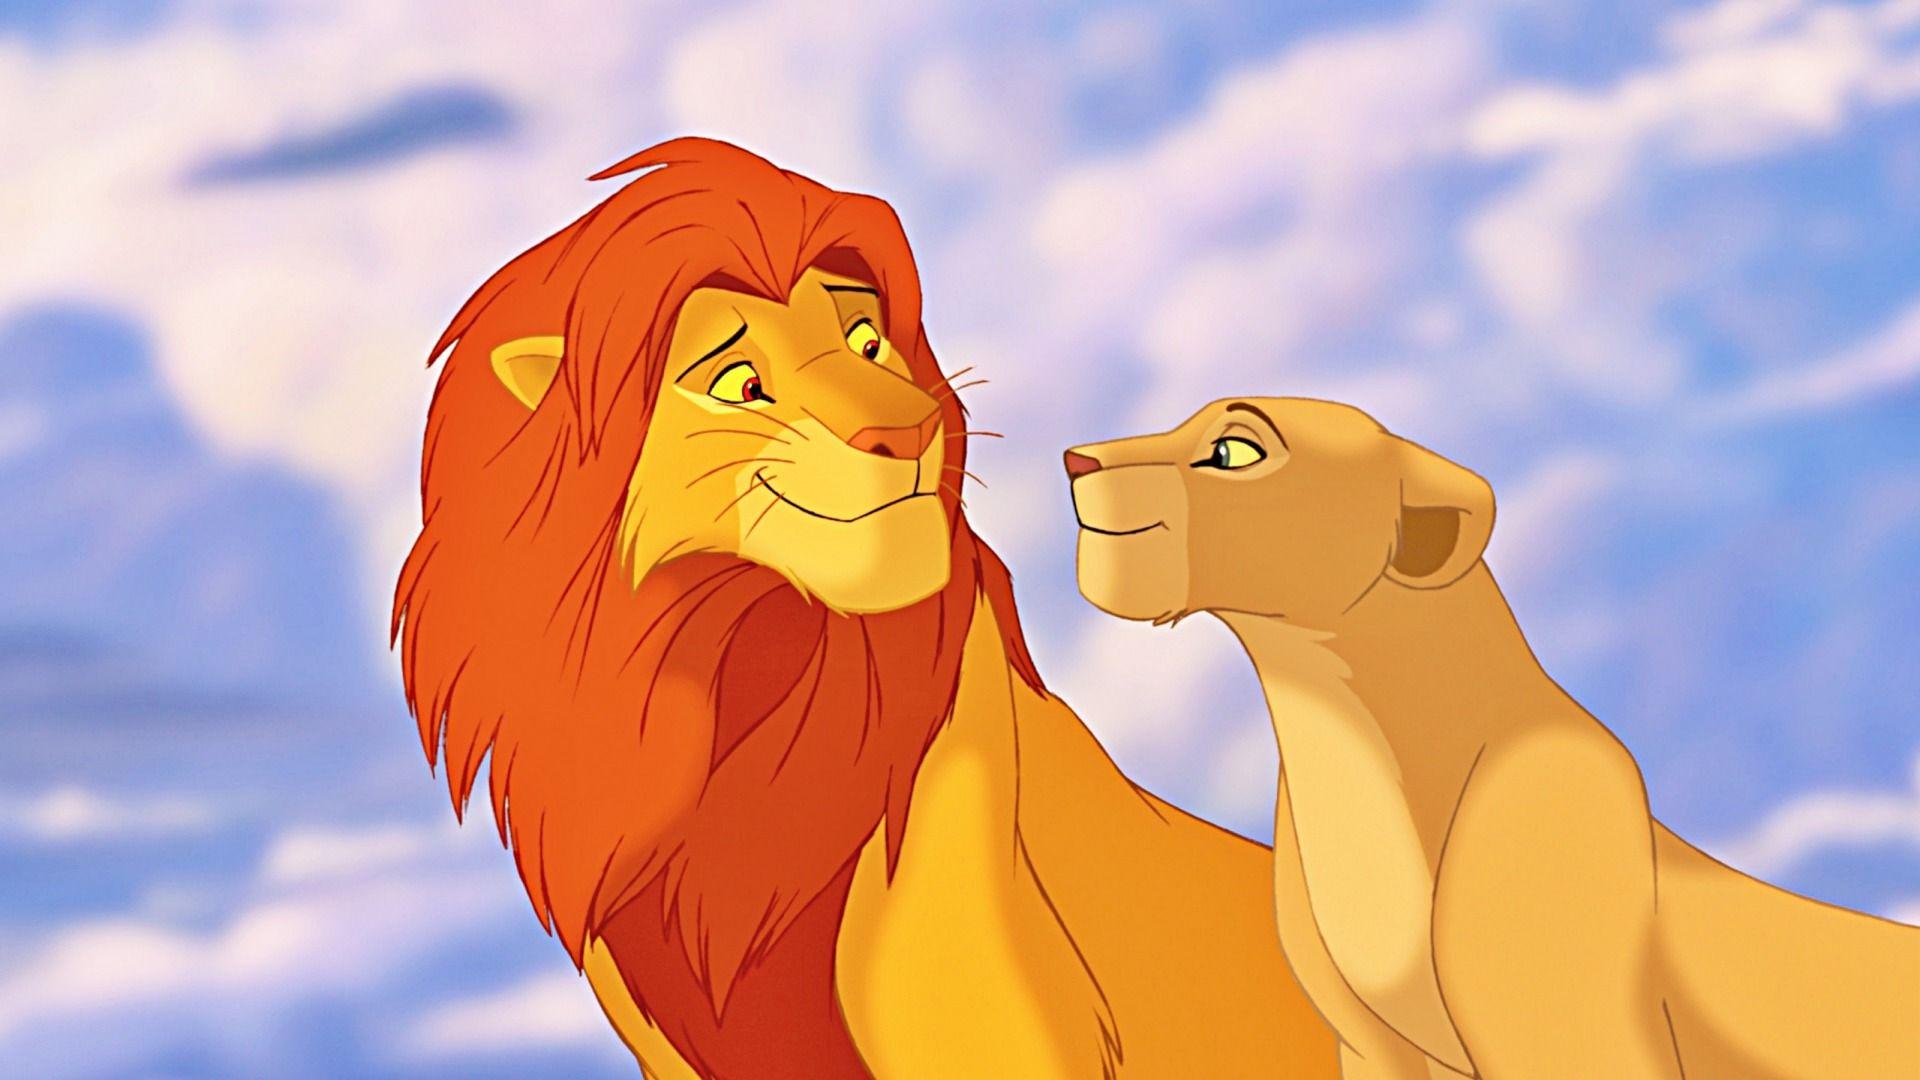 Wallpaper HD Lion King on Wallimpex.com